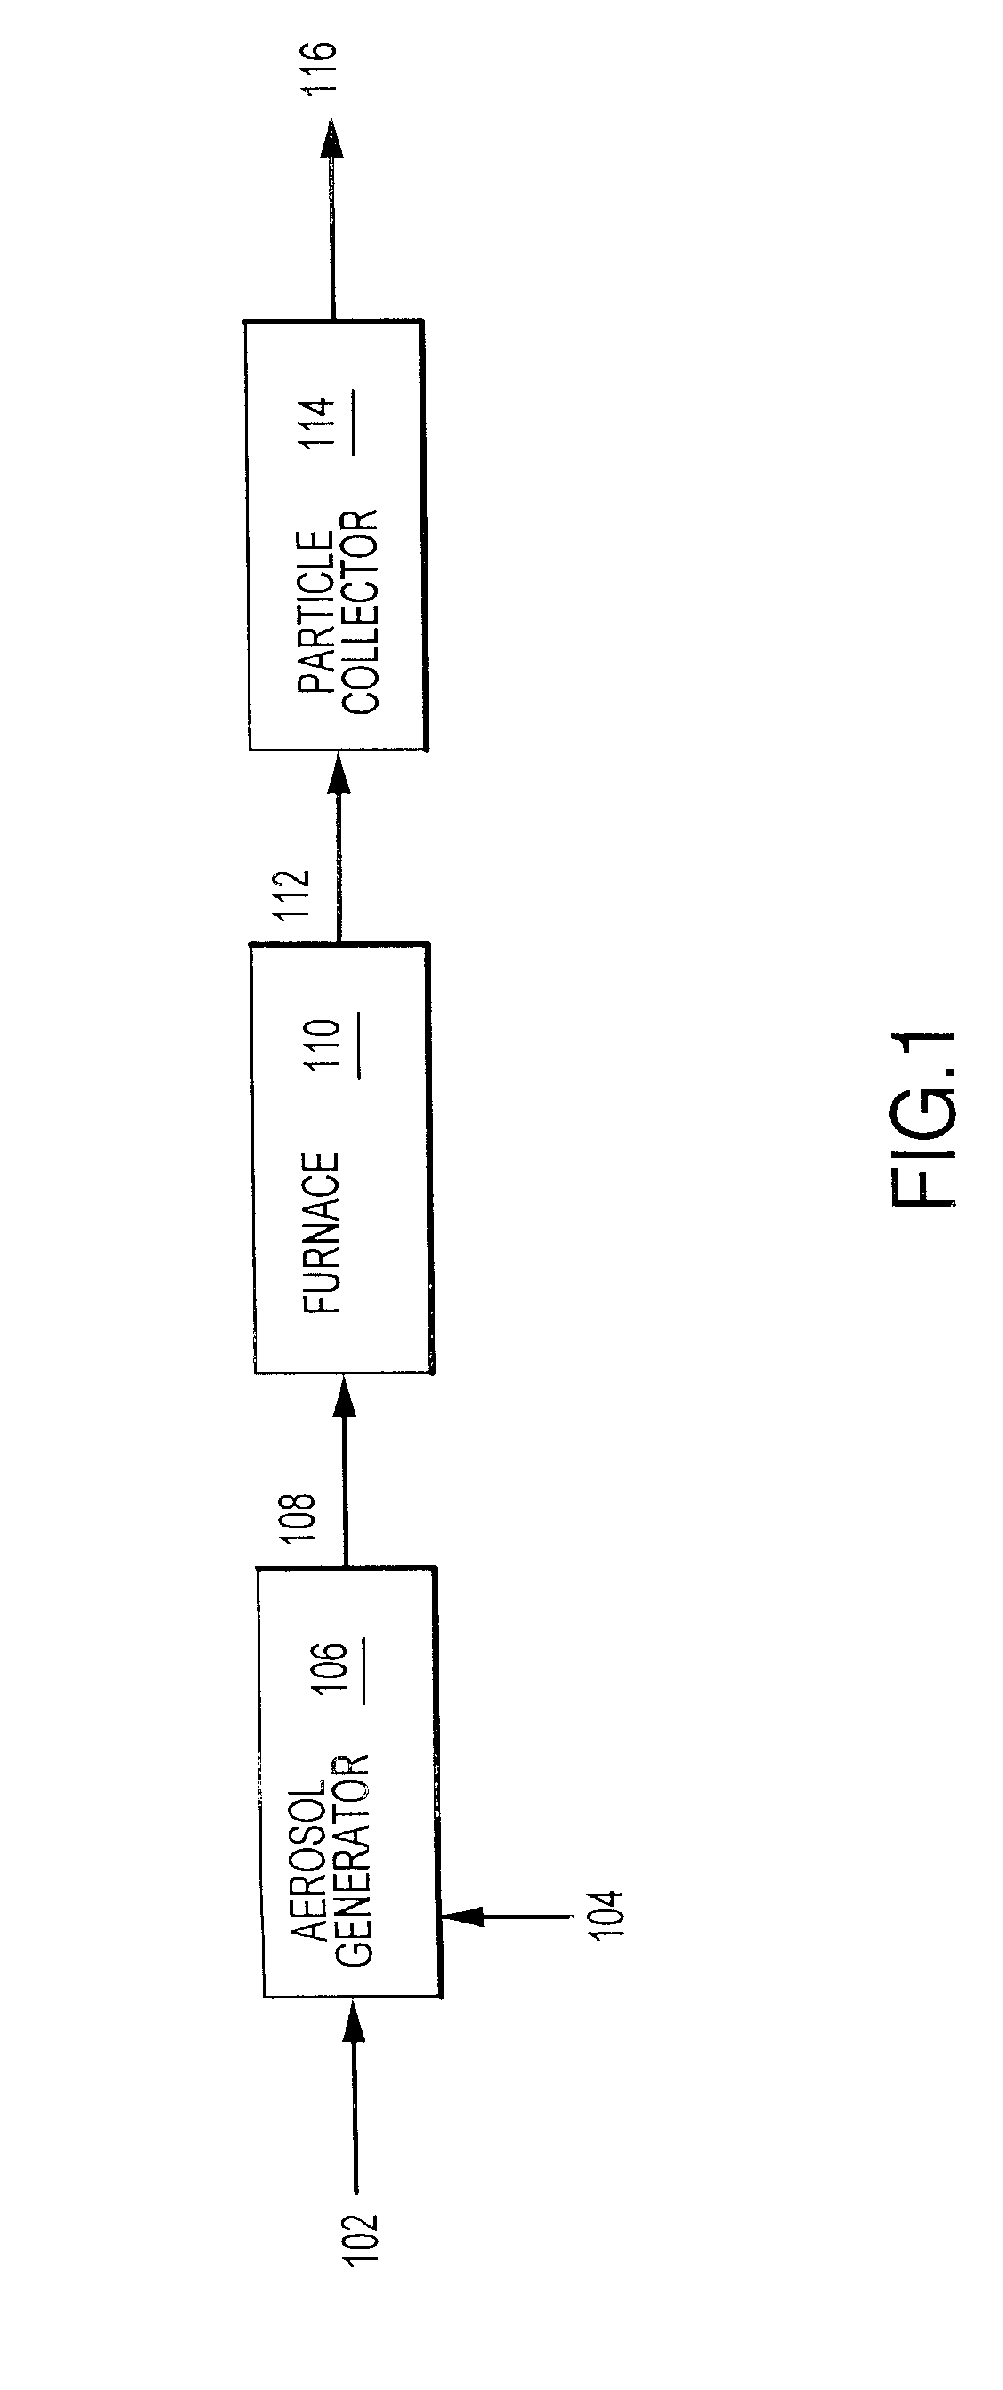 Aerosol method and apparatus, coated particulate products, and electronic devices made therefrom